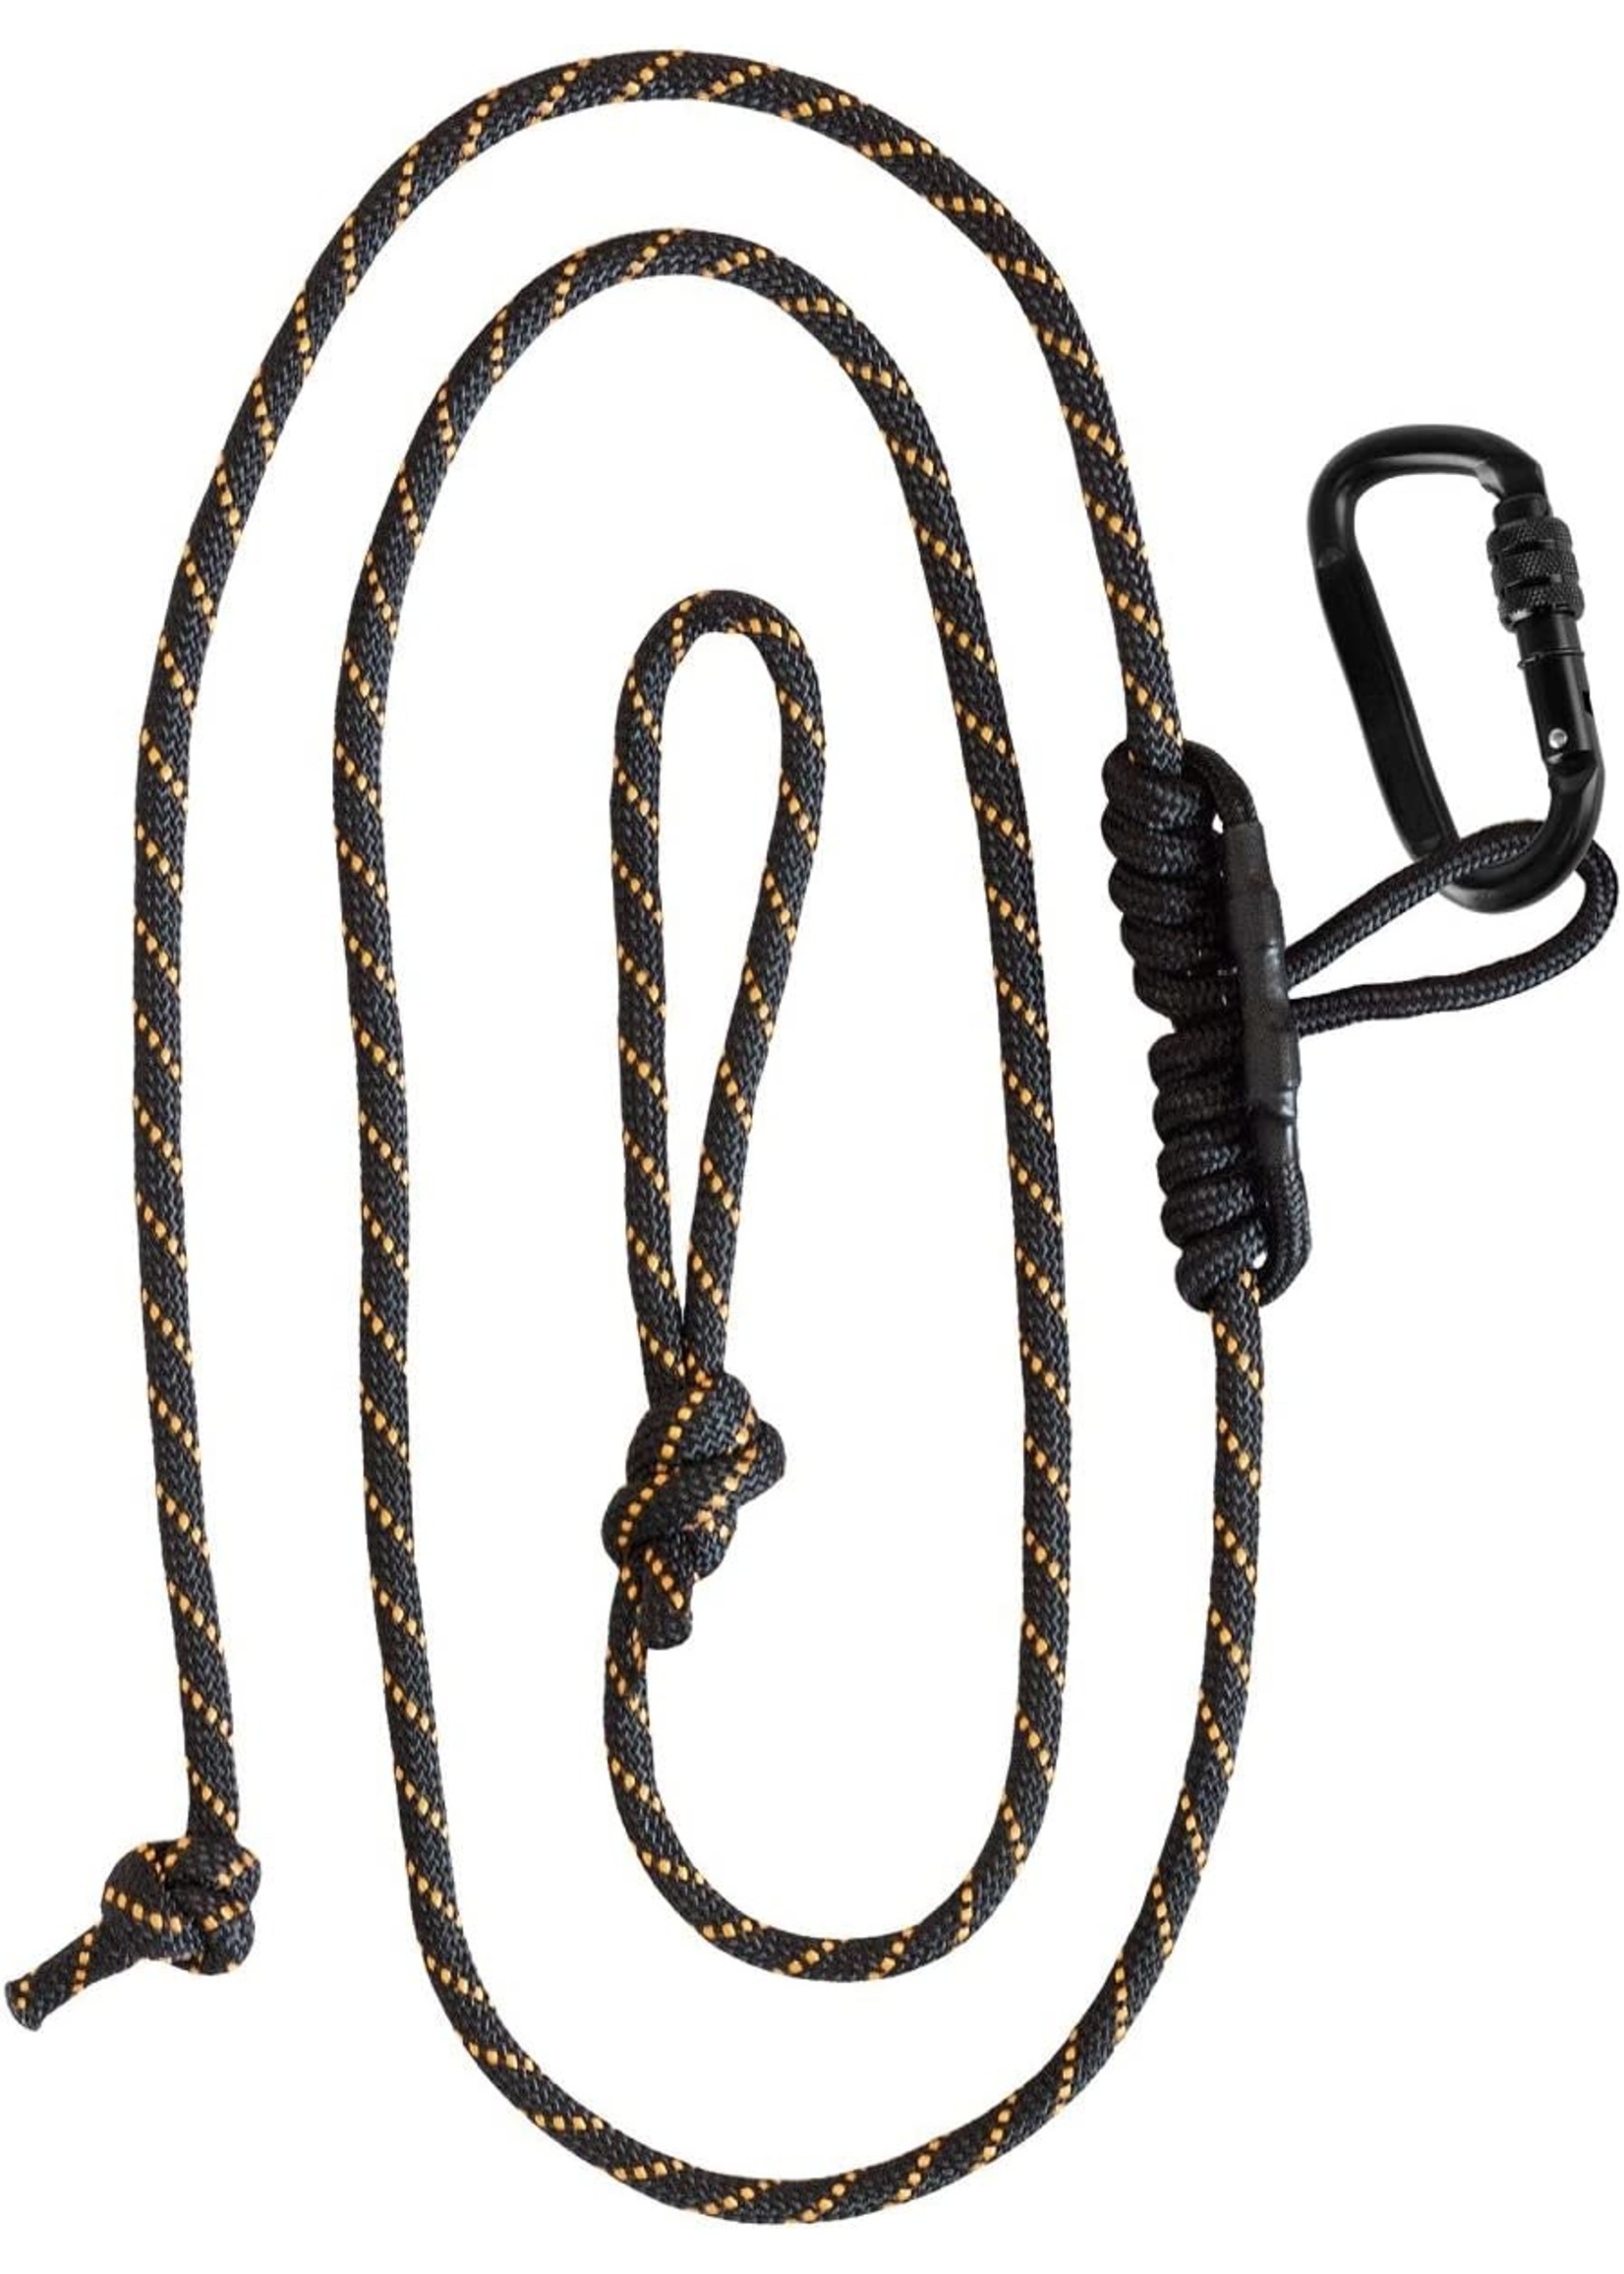 muddy safety harness lineman's rope